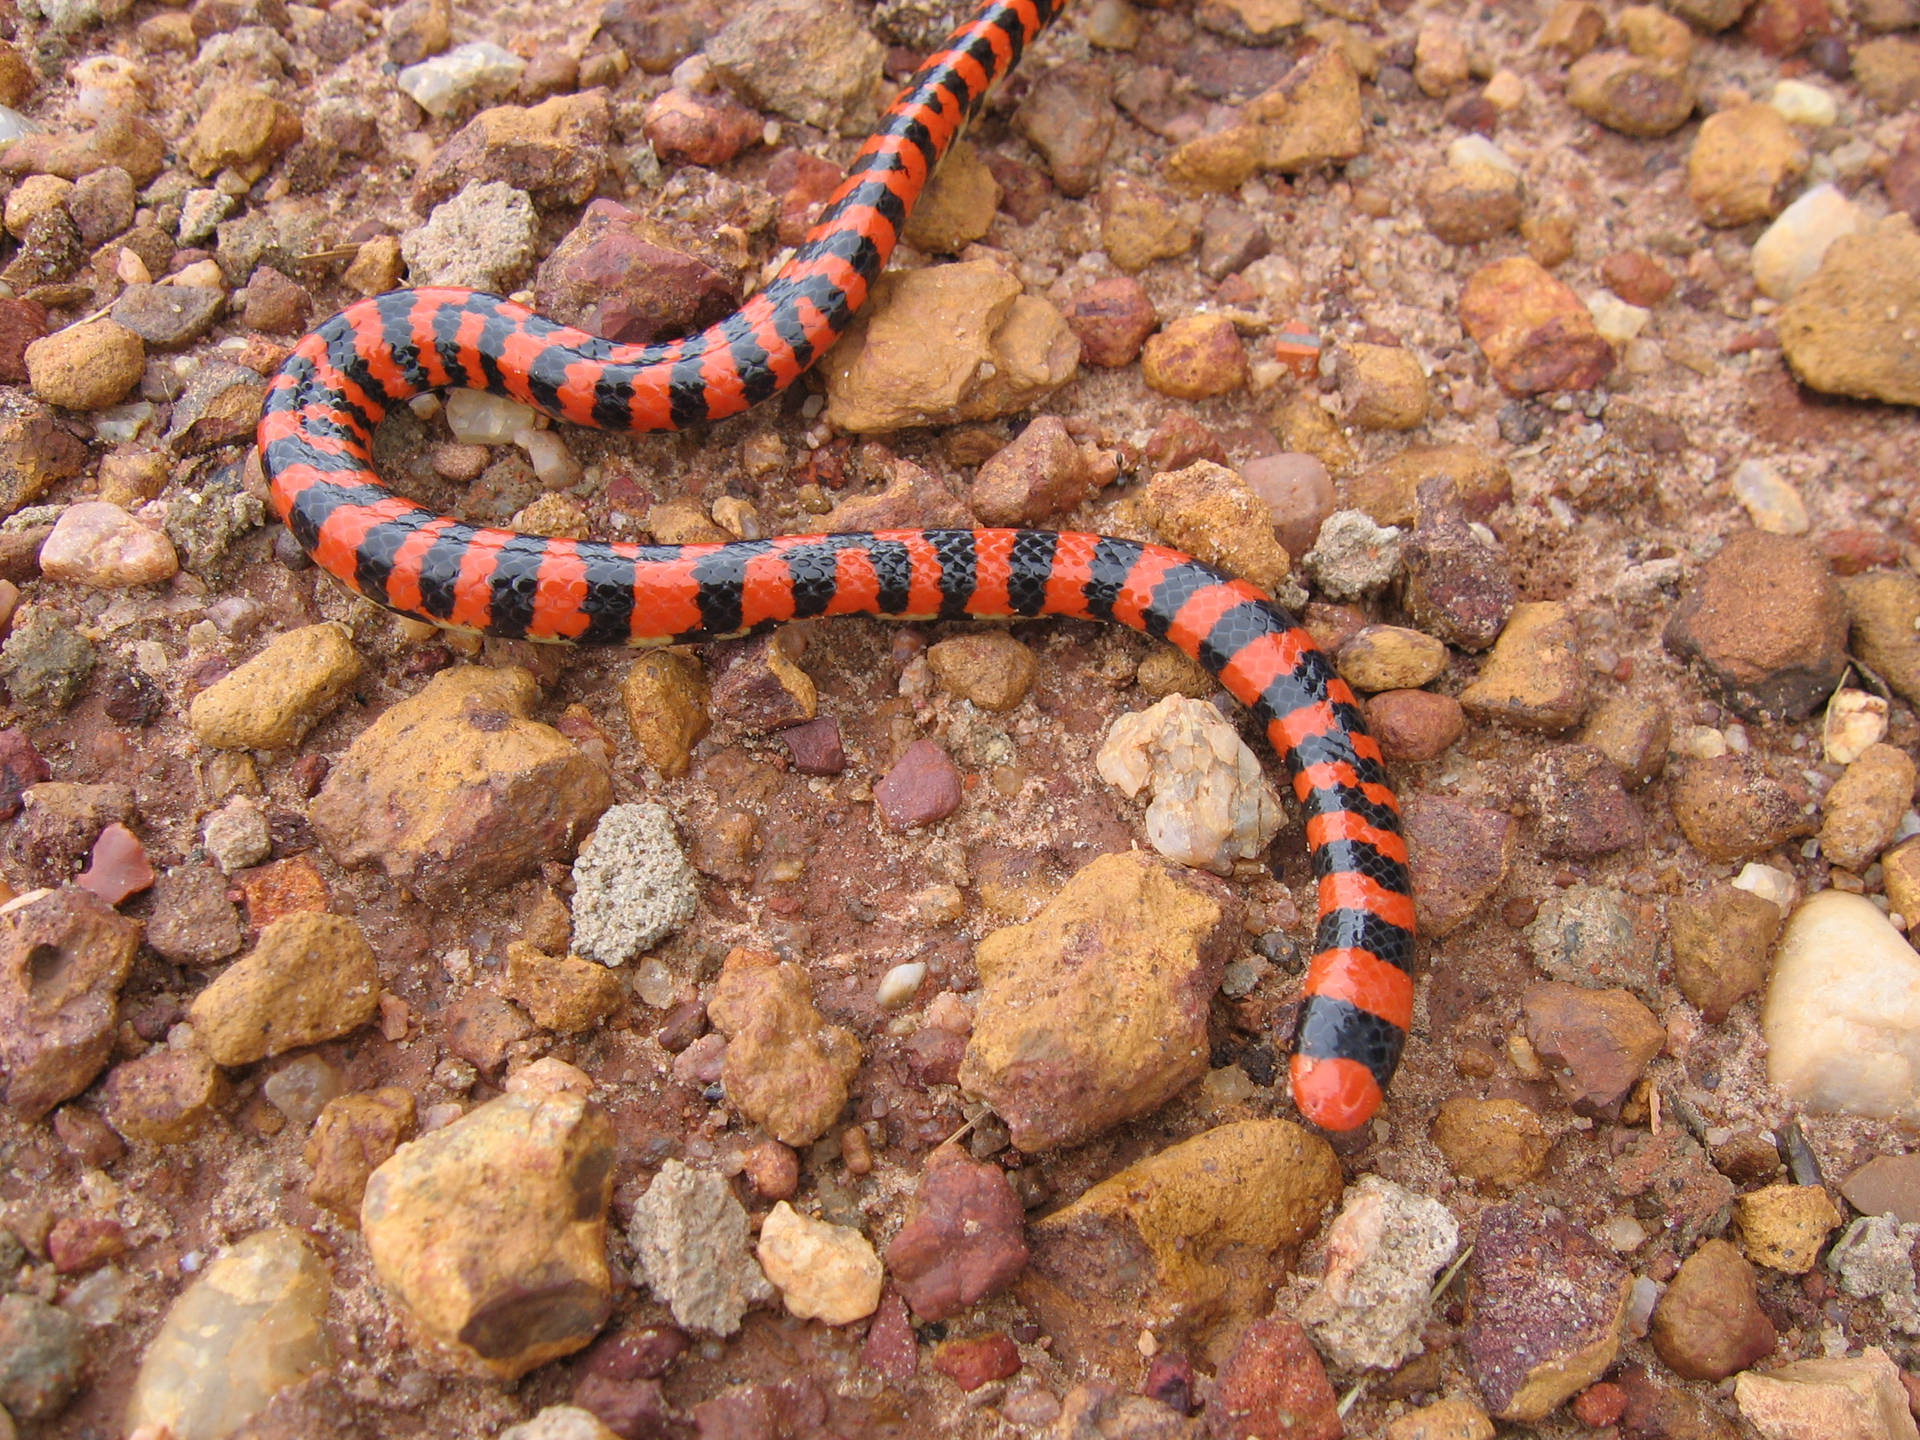 False Coral Snake On Dried Mud Wallpaper